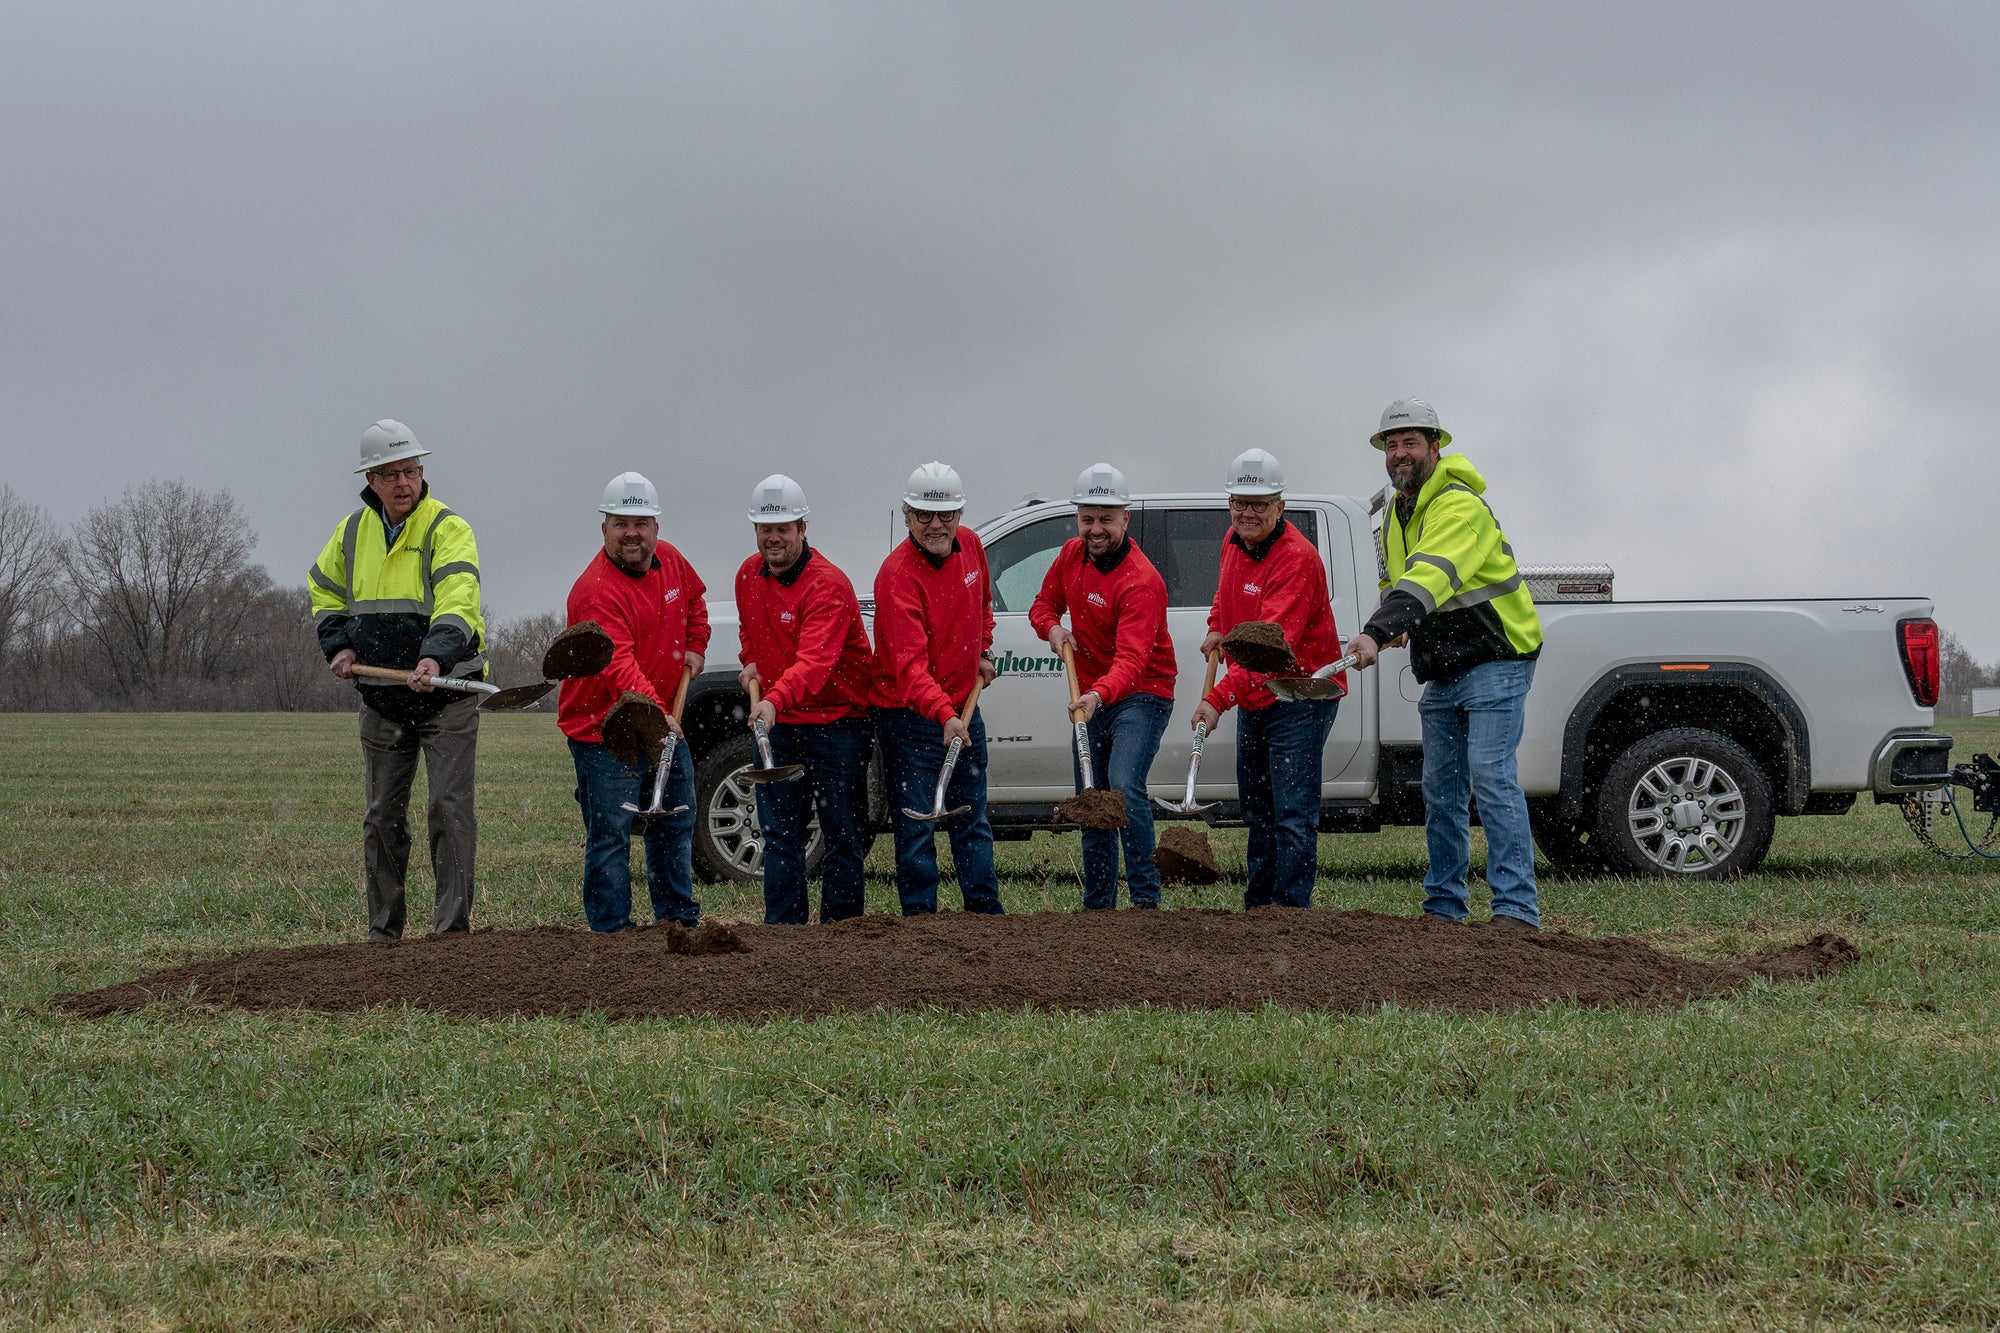 Wiha Tools Begins Construction on Phase 1 of New U.S. Headquarters and Logistics Center